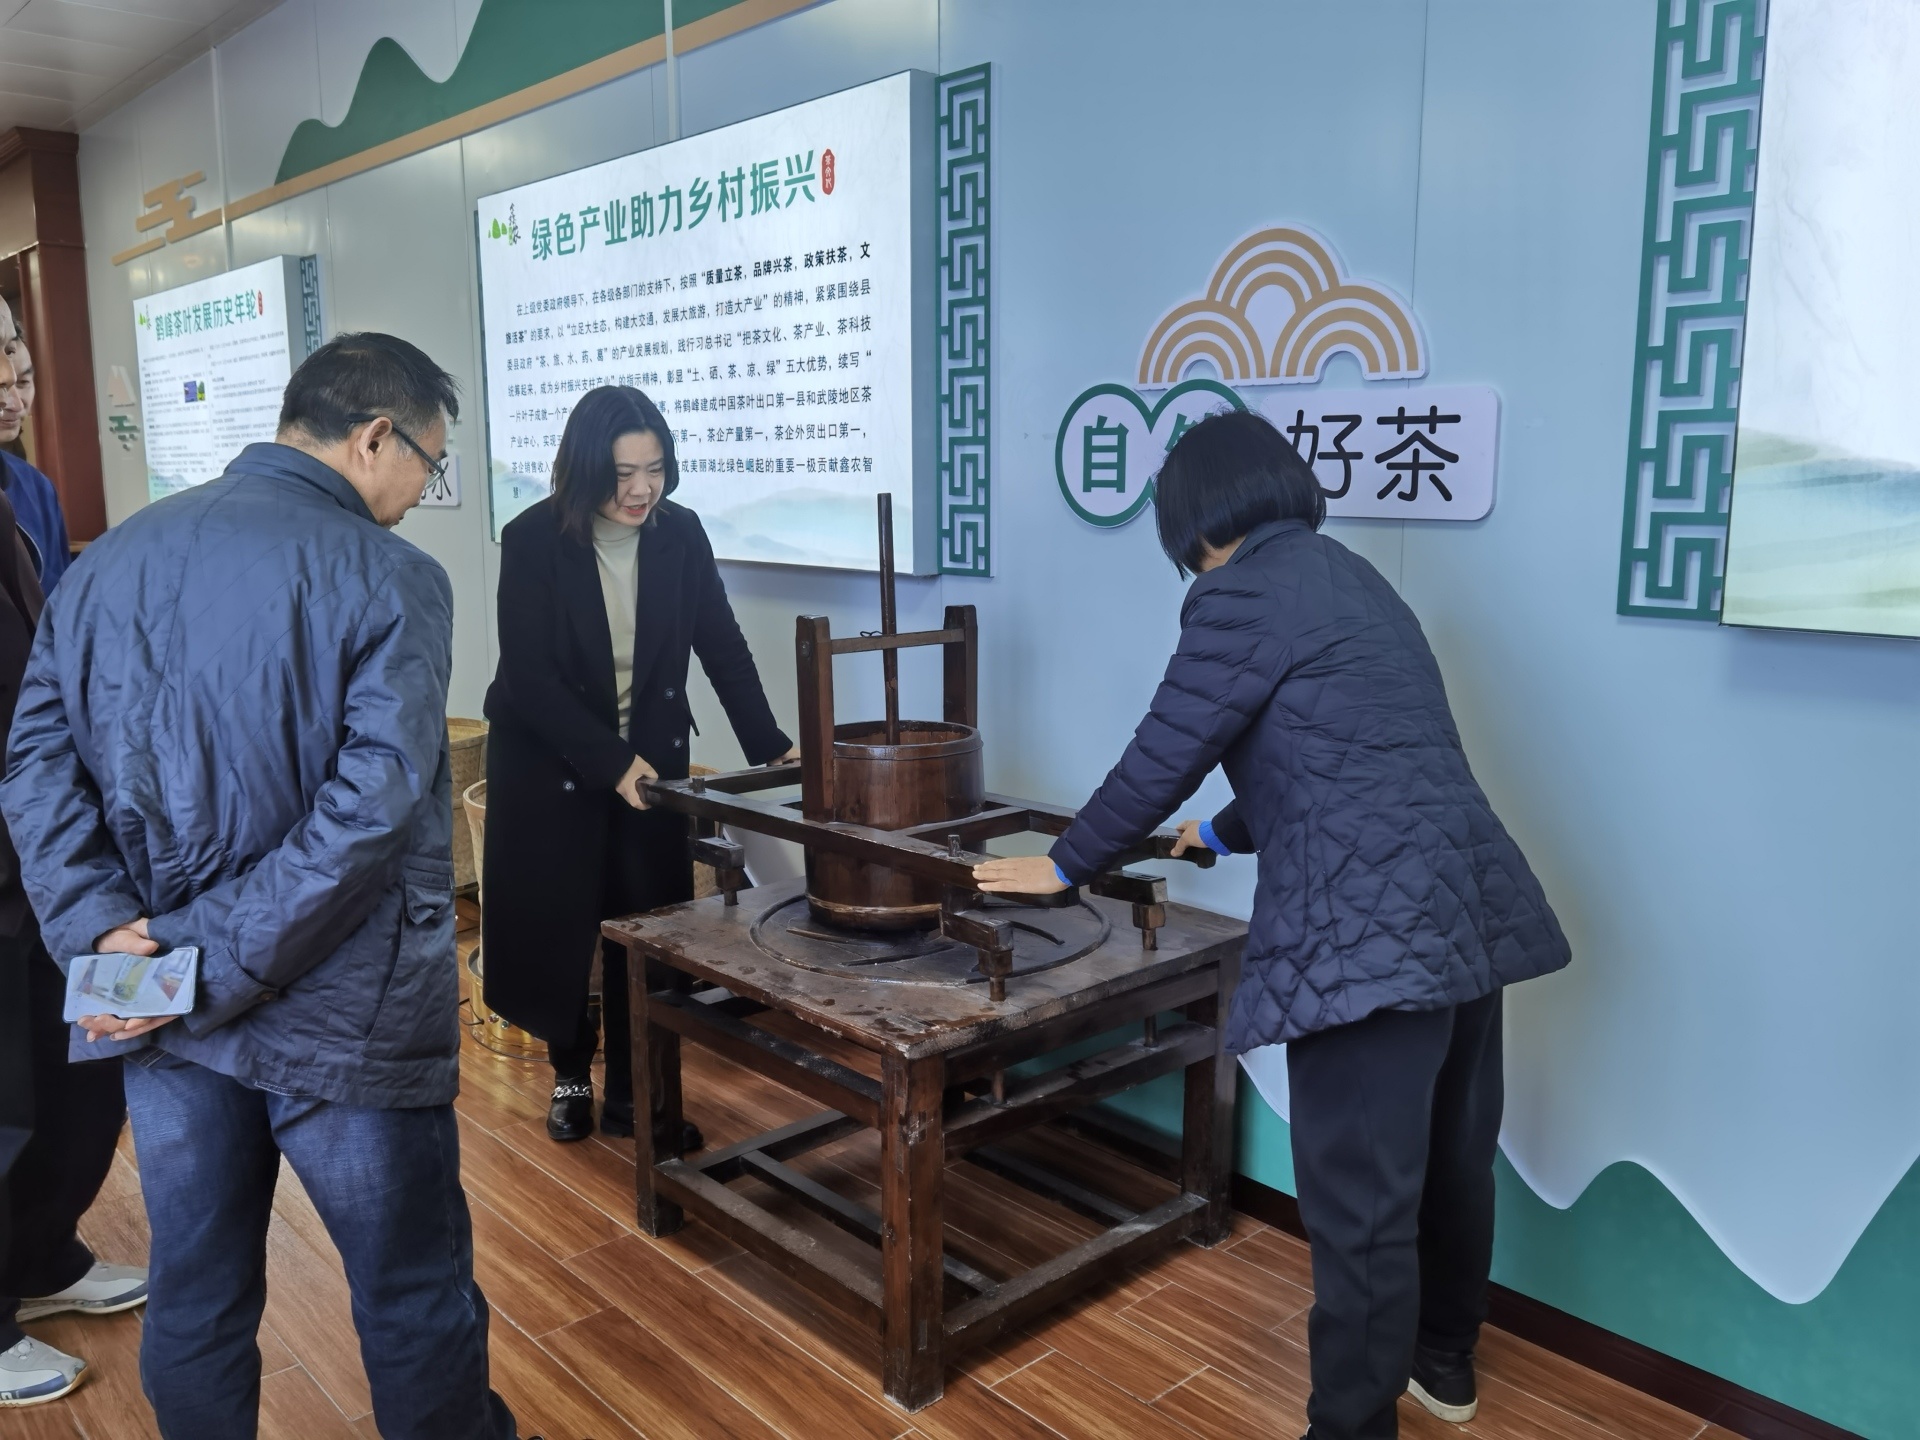 Xiang Liping, a first-level researcher from the State People's Committee, went to Xinnong Group to investigate and guide the inheritance of ethnic (tea) culture.